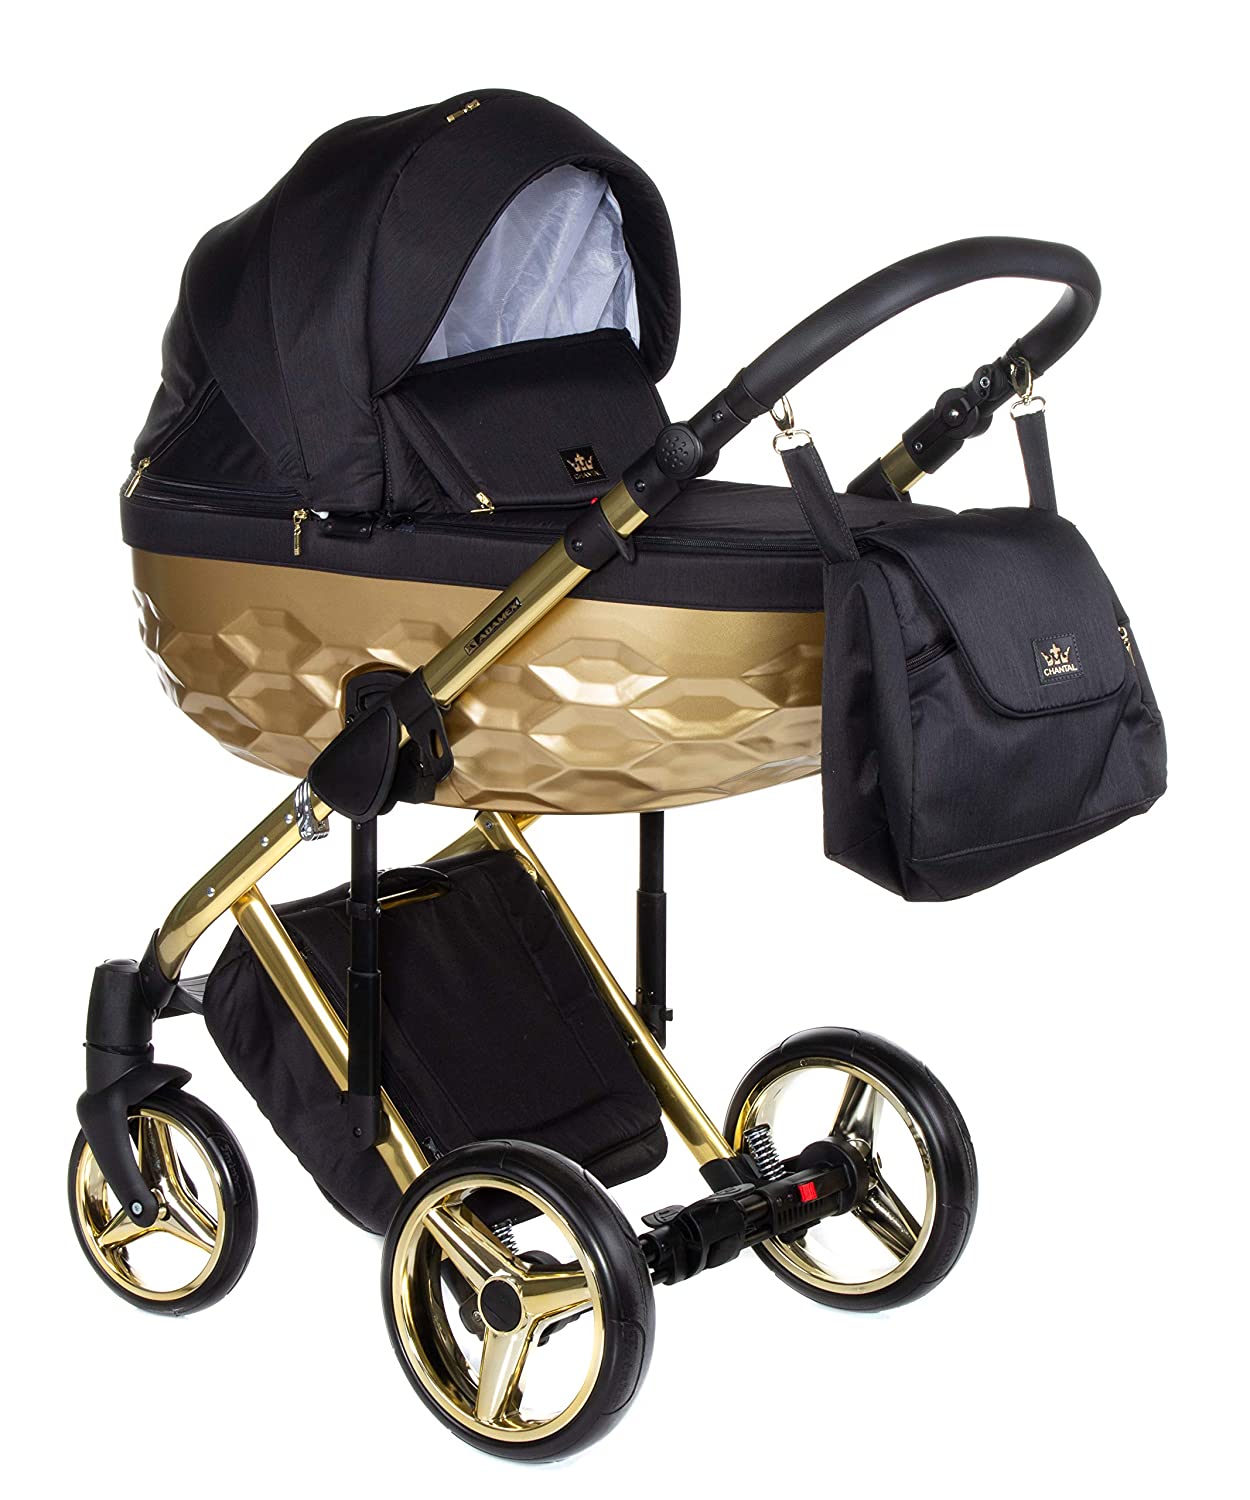 Adamex Chantal Pushchair Combination Pram Complete Set + Wail Bag with Changing Mattress + Film + Mosquito Net + Cup Holder and Winter Muffs (Star 6 - Gold Black, 3-in-1)